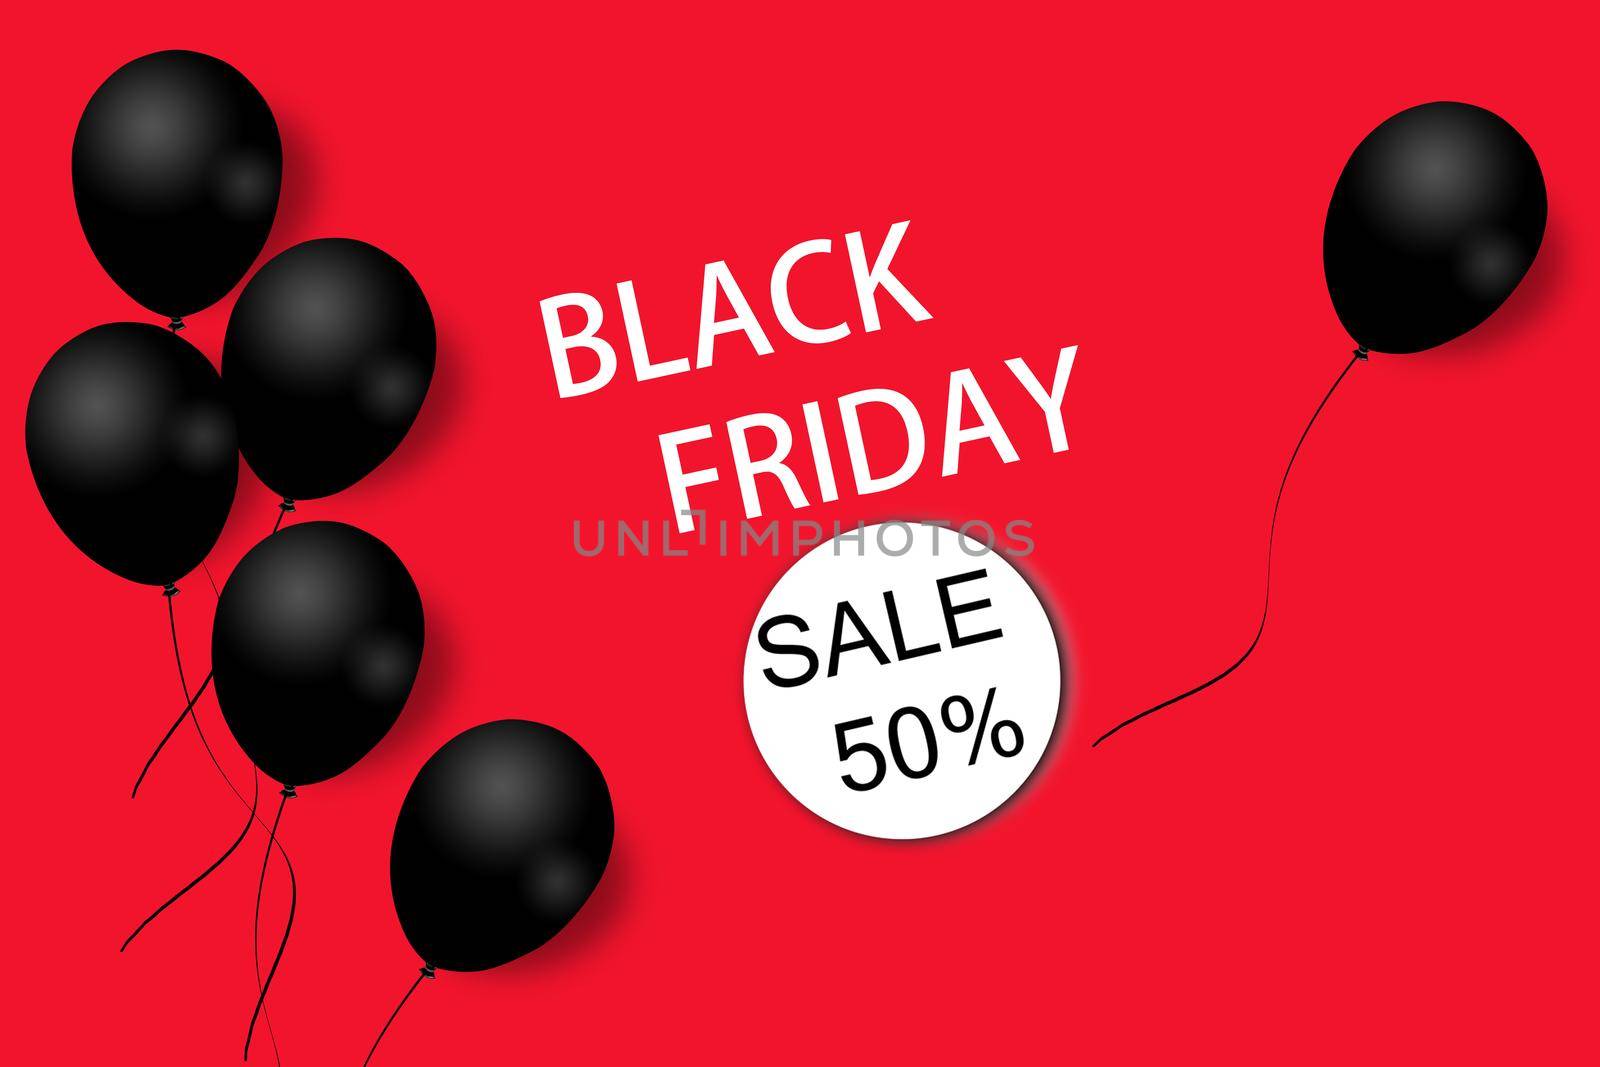 Black Friday sale background template. Red background with black balloons for seasonal discount offer. Illustration. Pattern